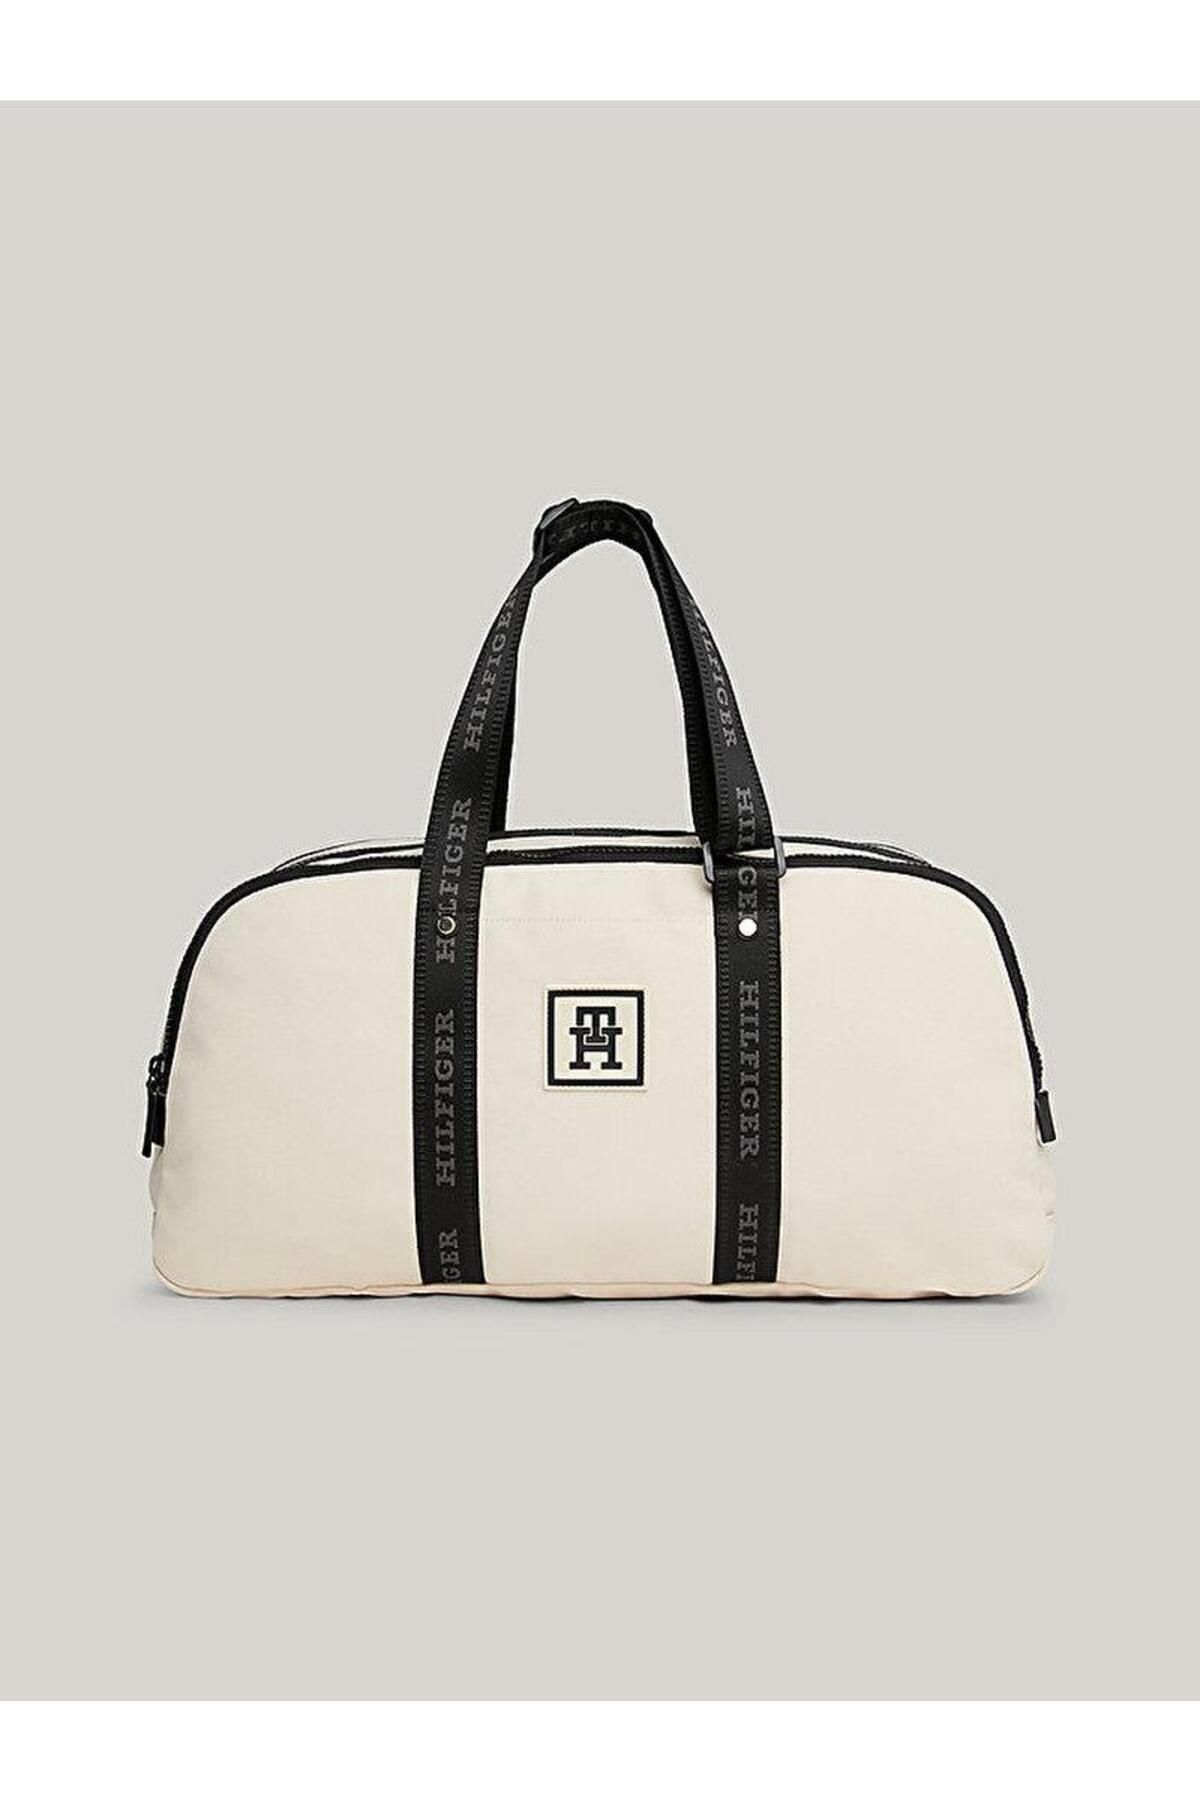 Tommy Hilfiger TH SPORT LUXE DUFFLE